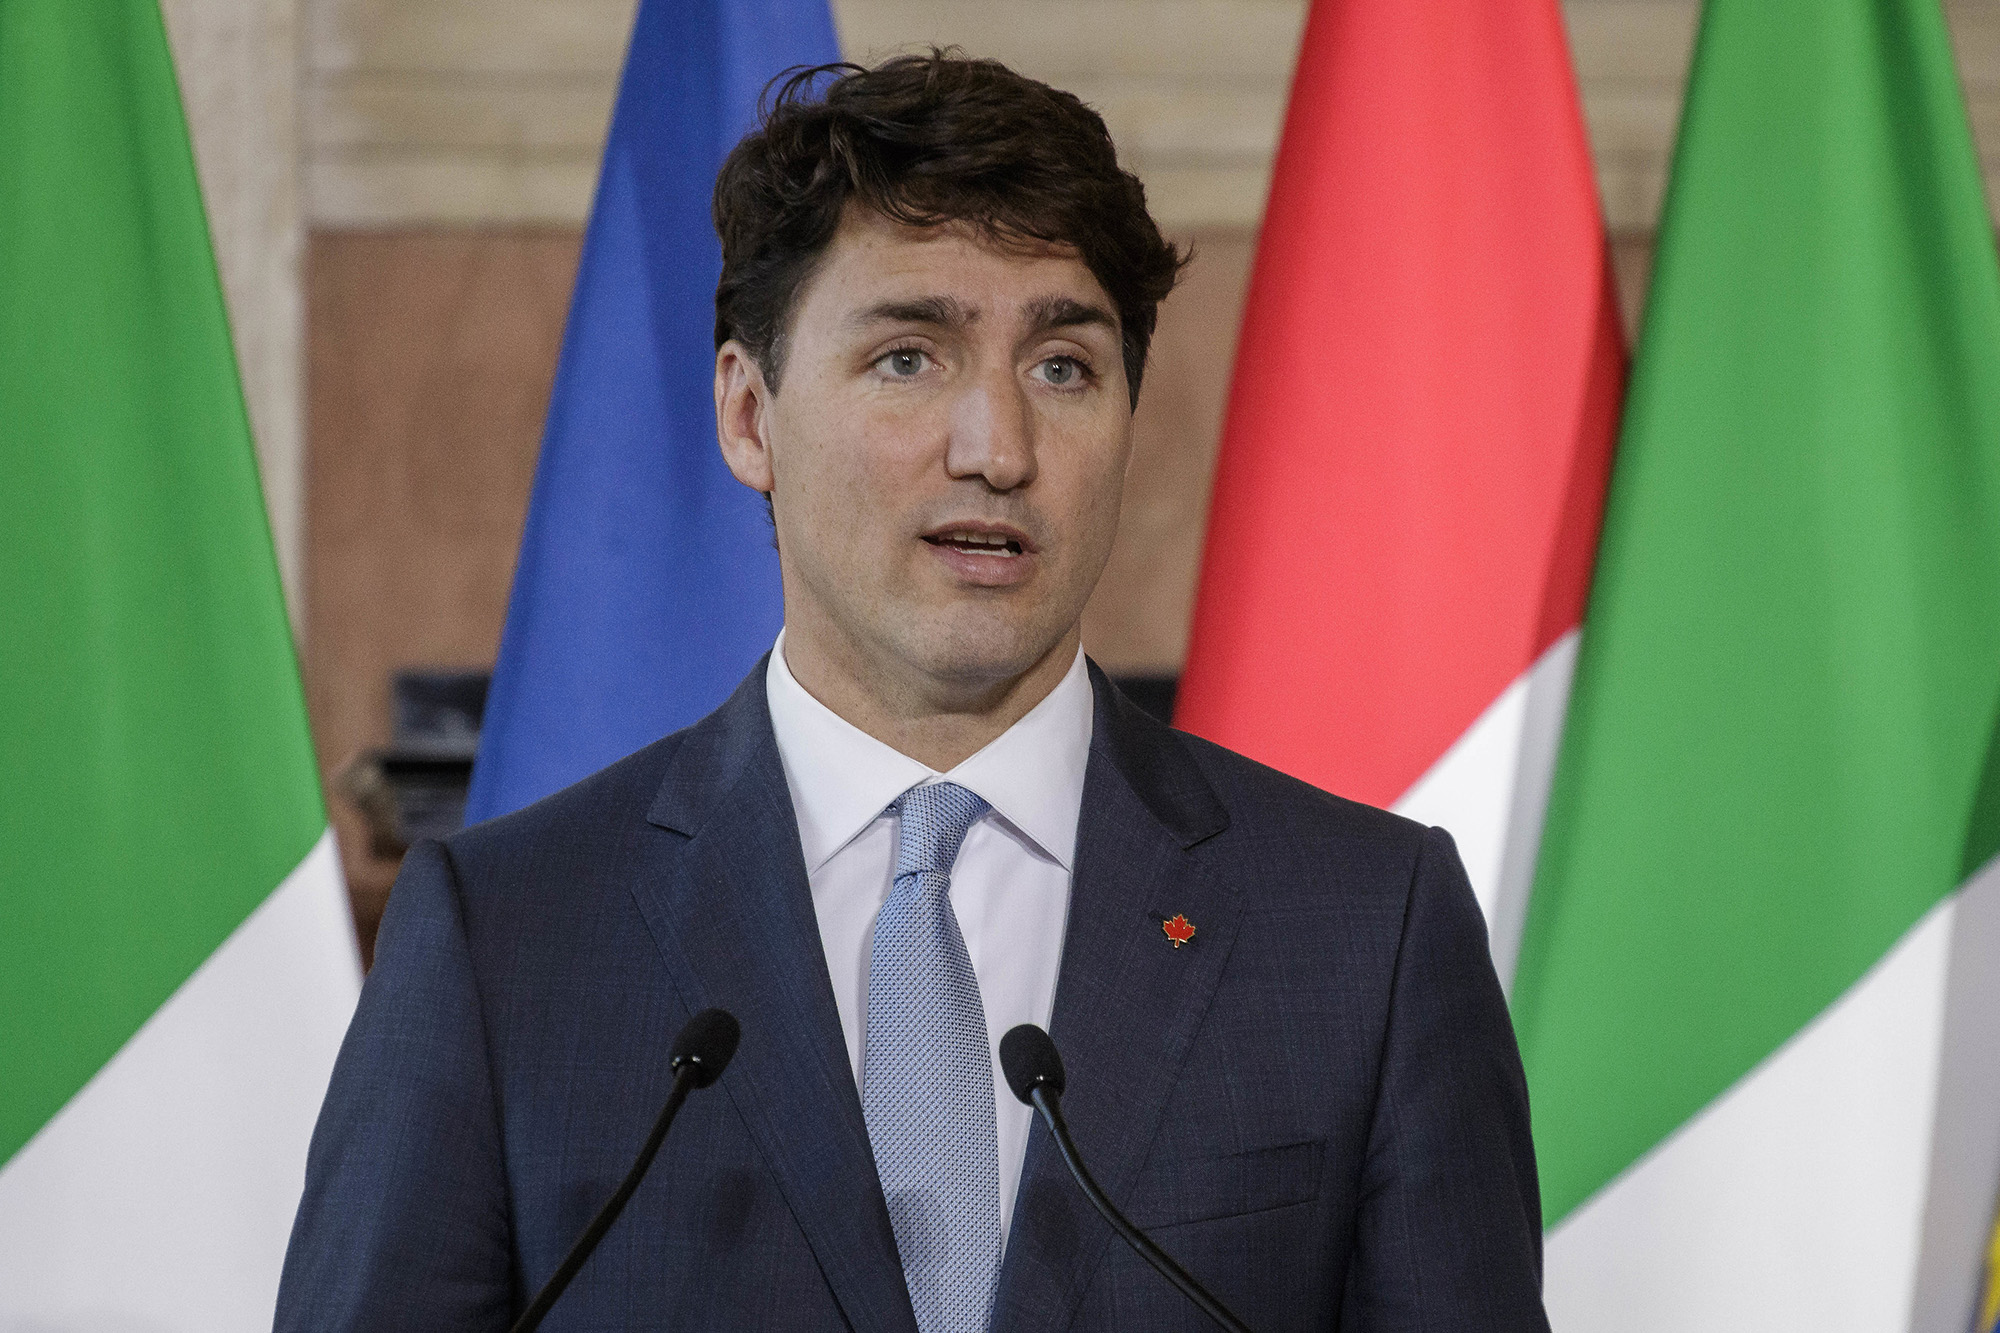 Prime Minister of Canada Justin Trudeau meets with Italian